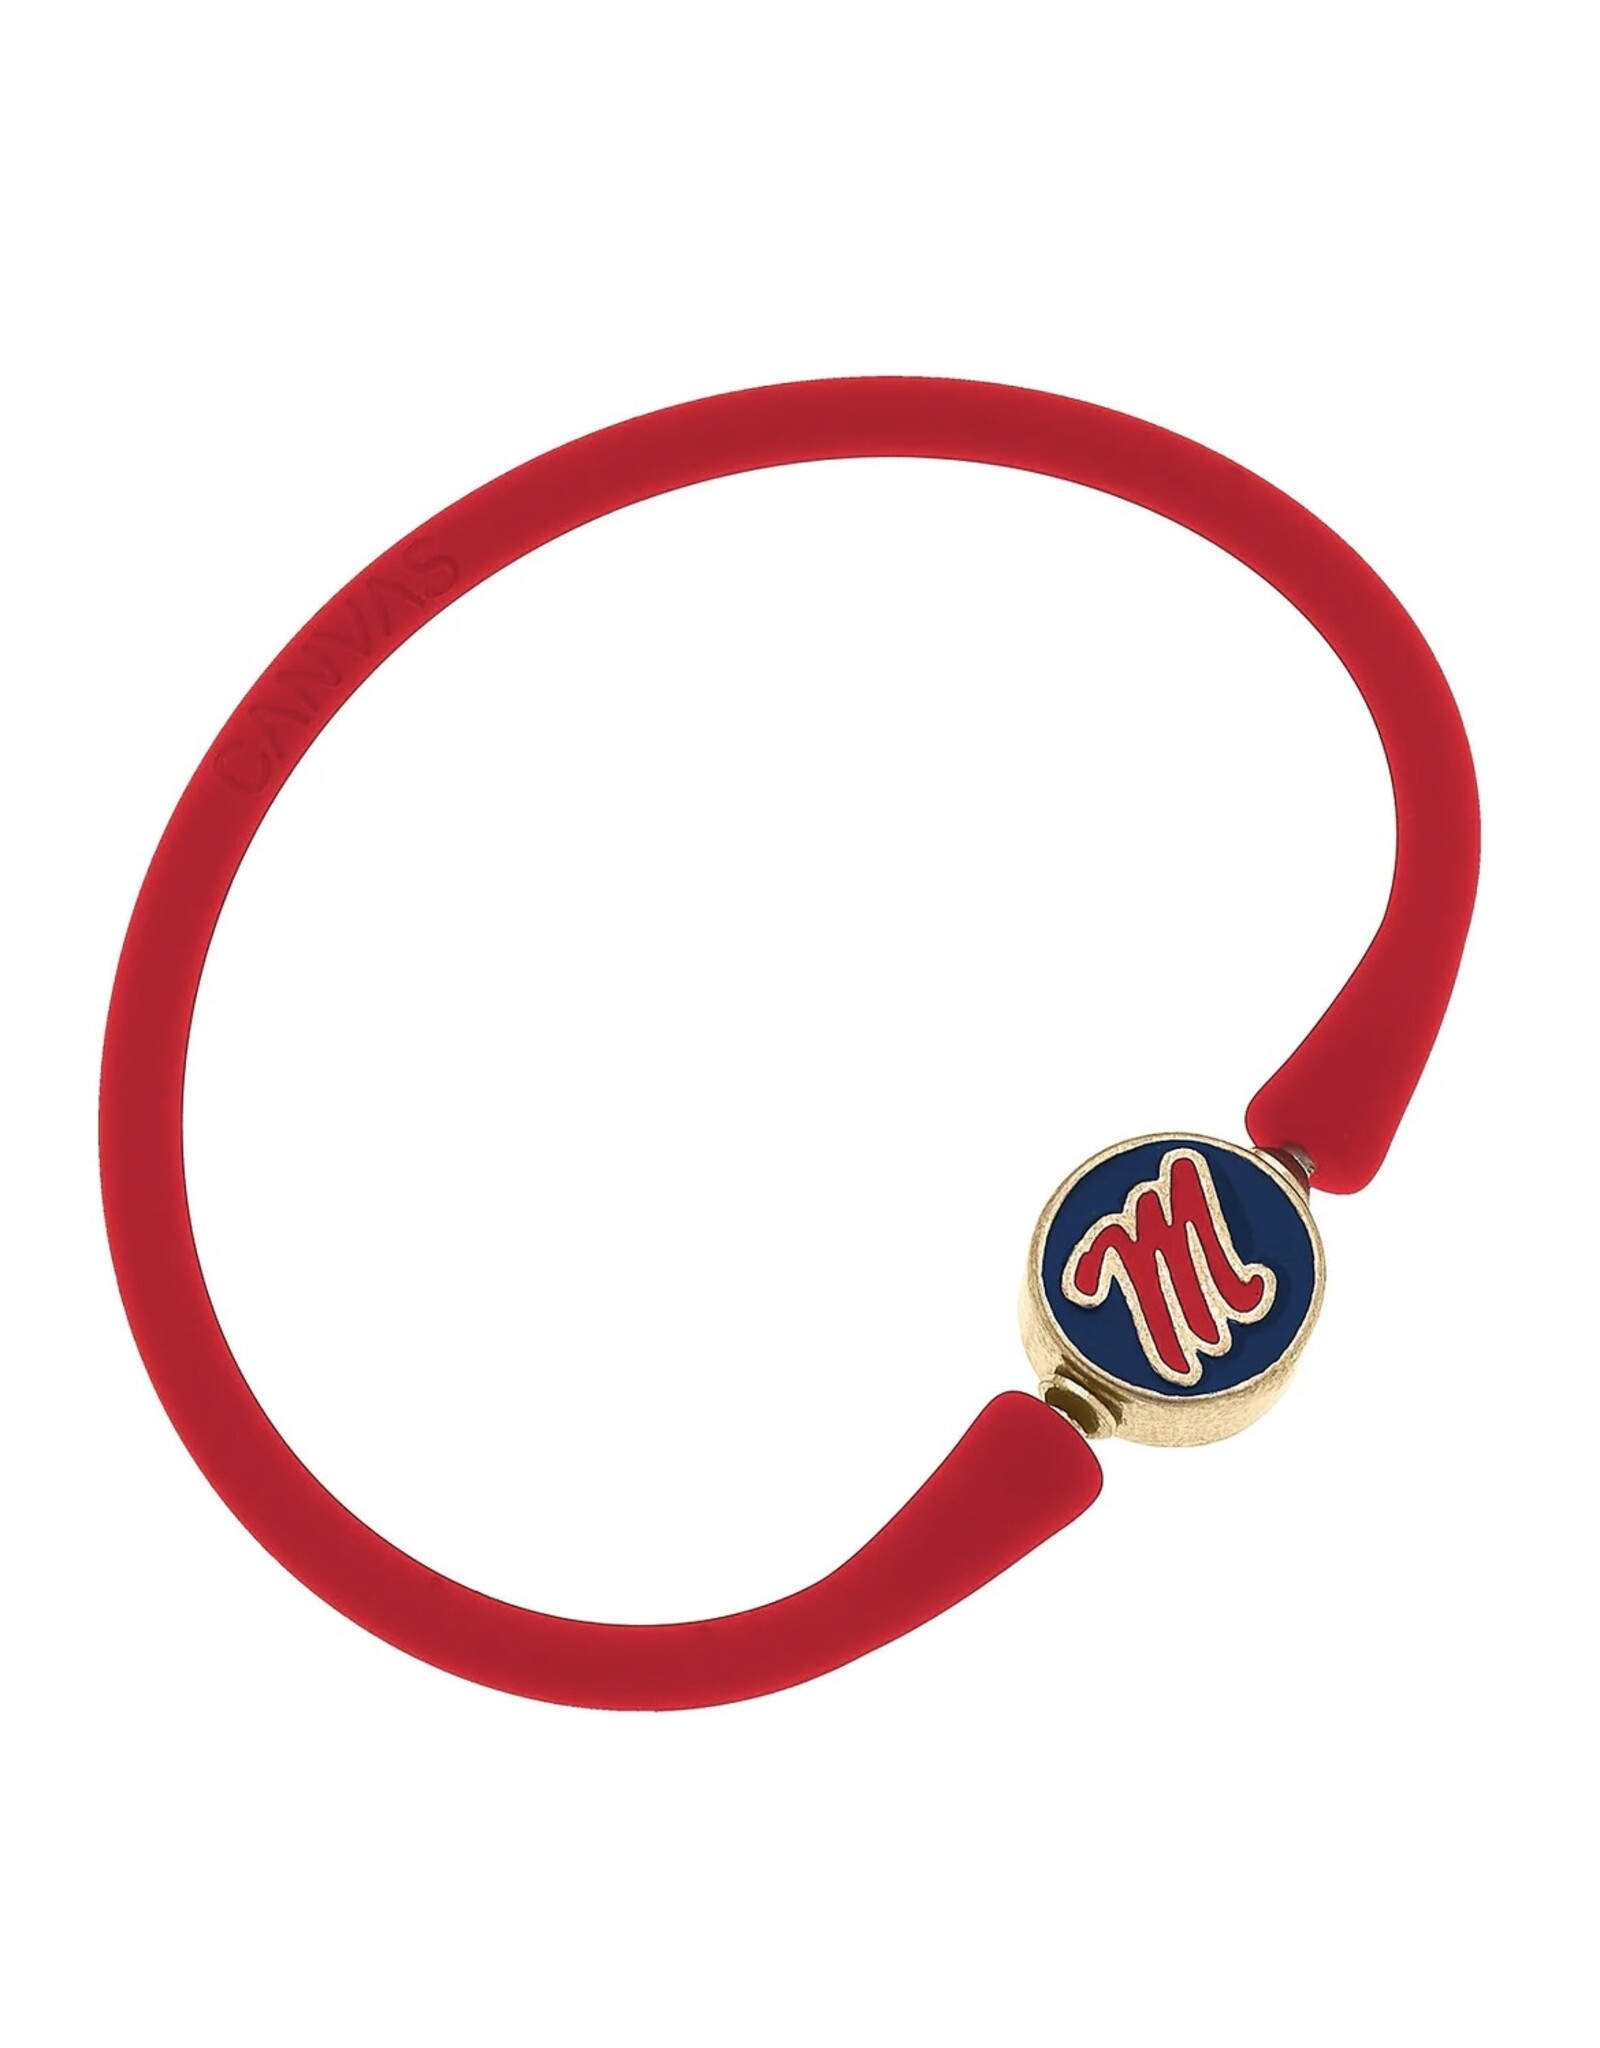 23131B-MS-RD] Ole Miss Enamel Bali of Heart Silicone Bracelet in - the Rebels South Red